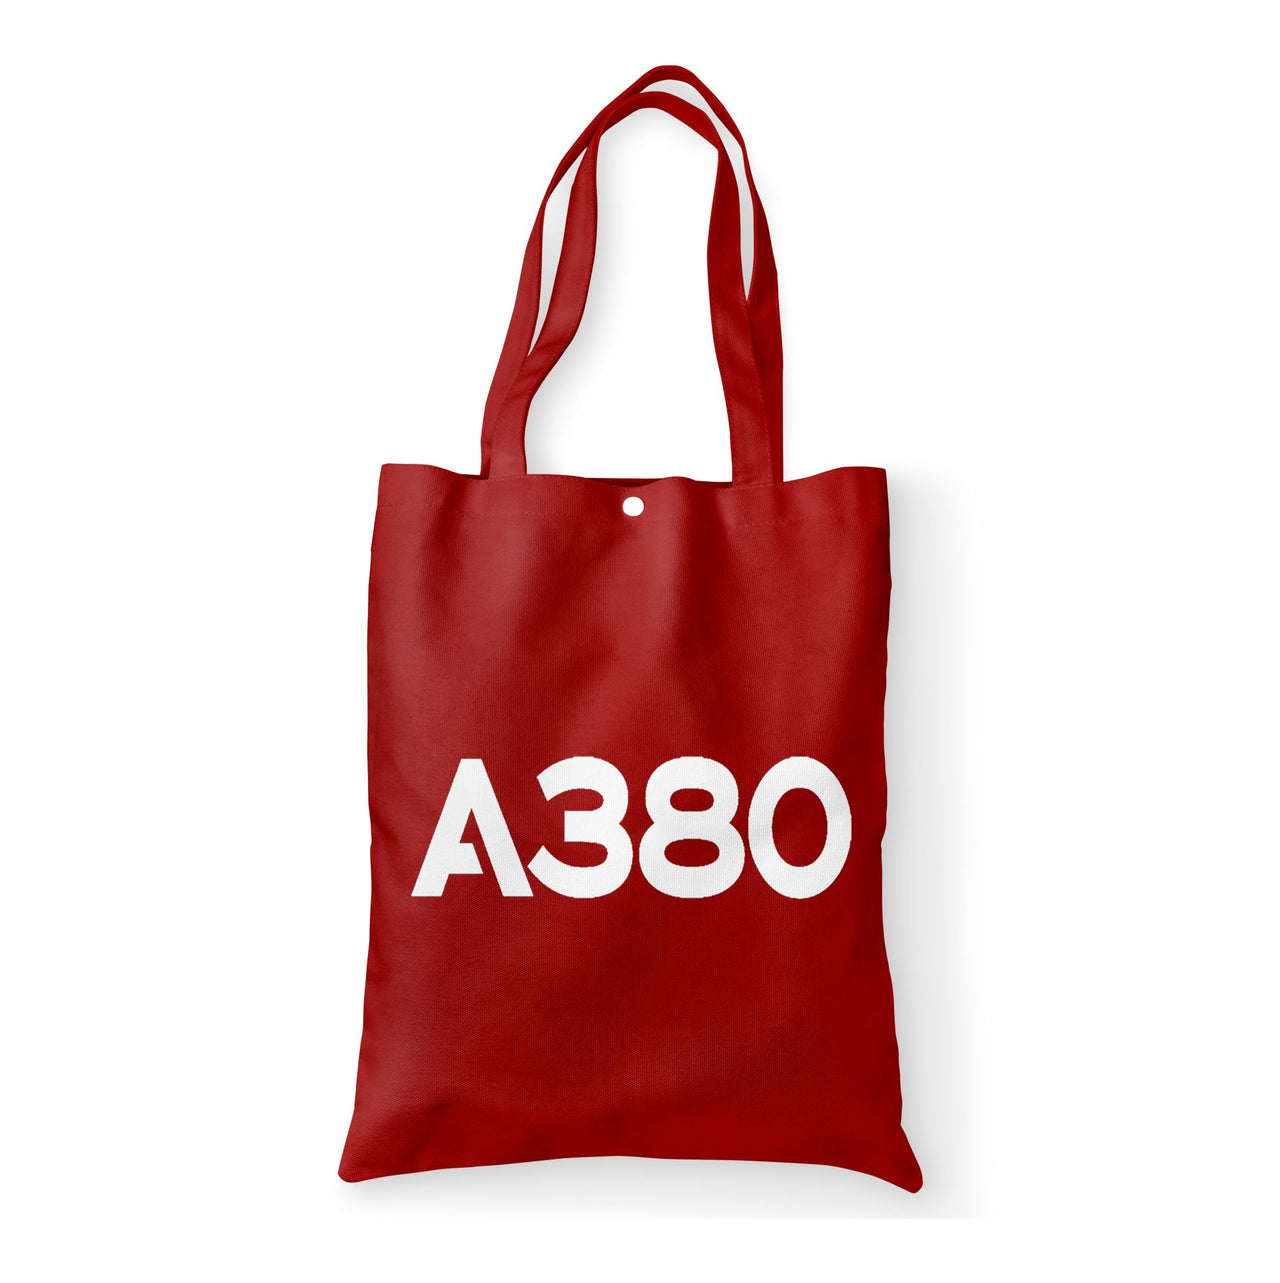 A380 Flat Text Designed Tote Bags